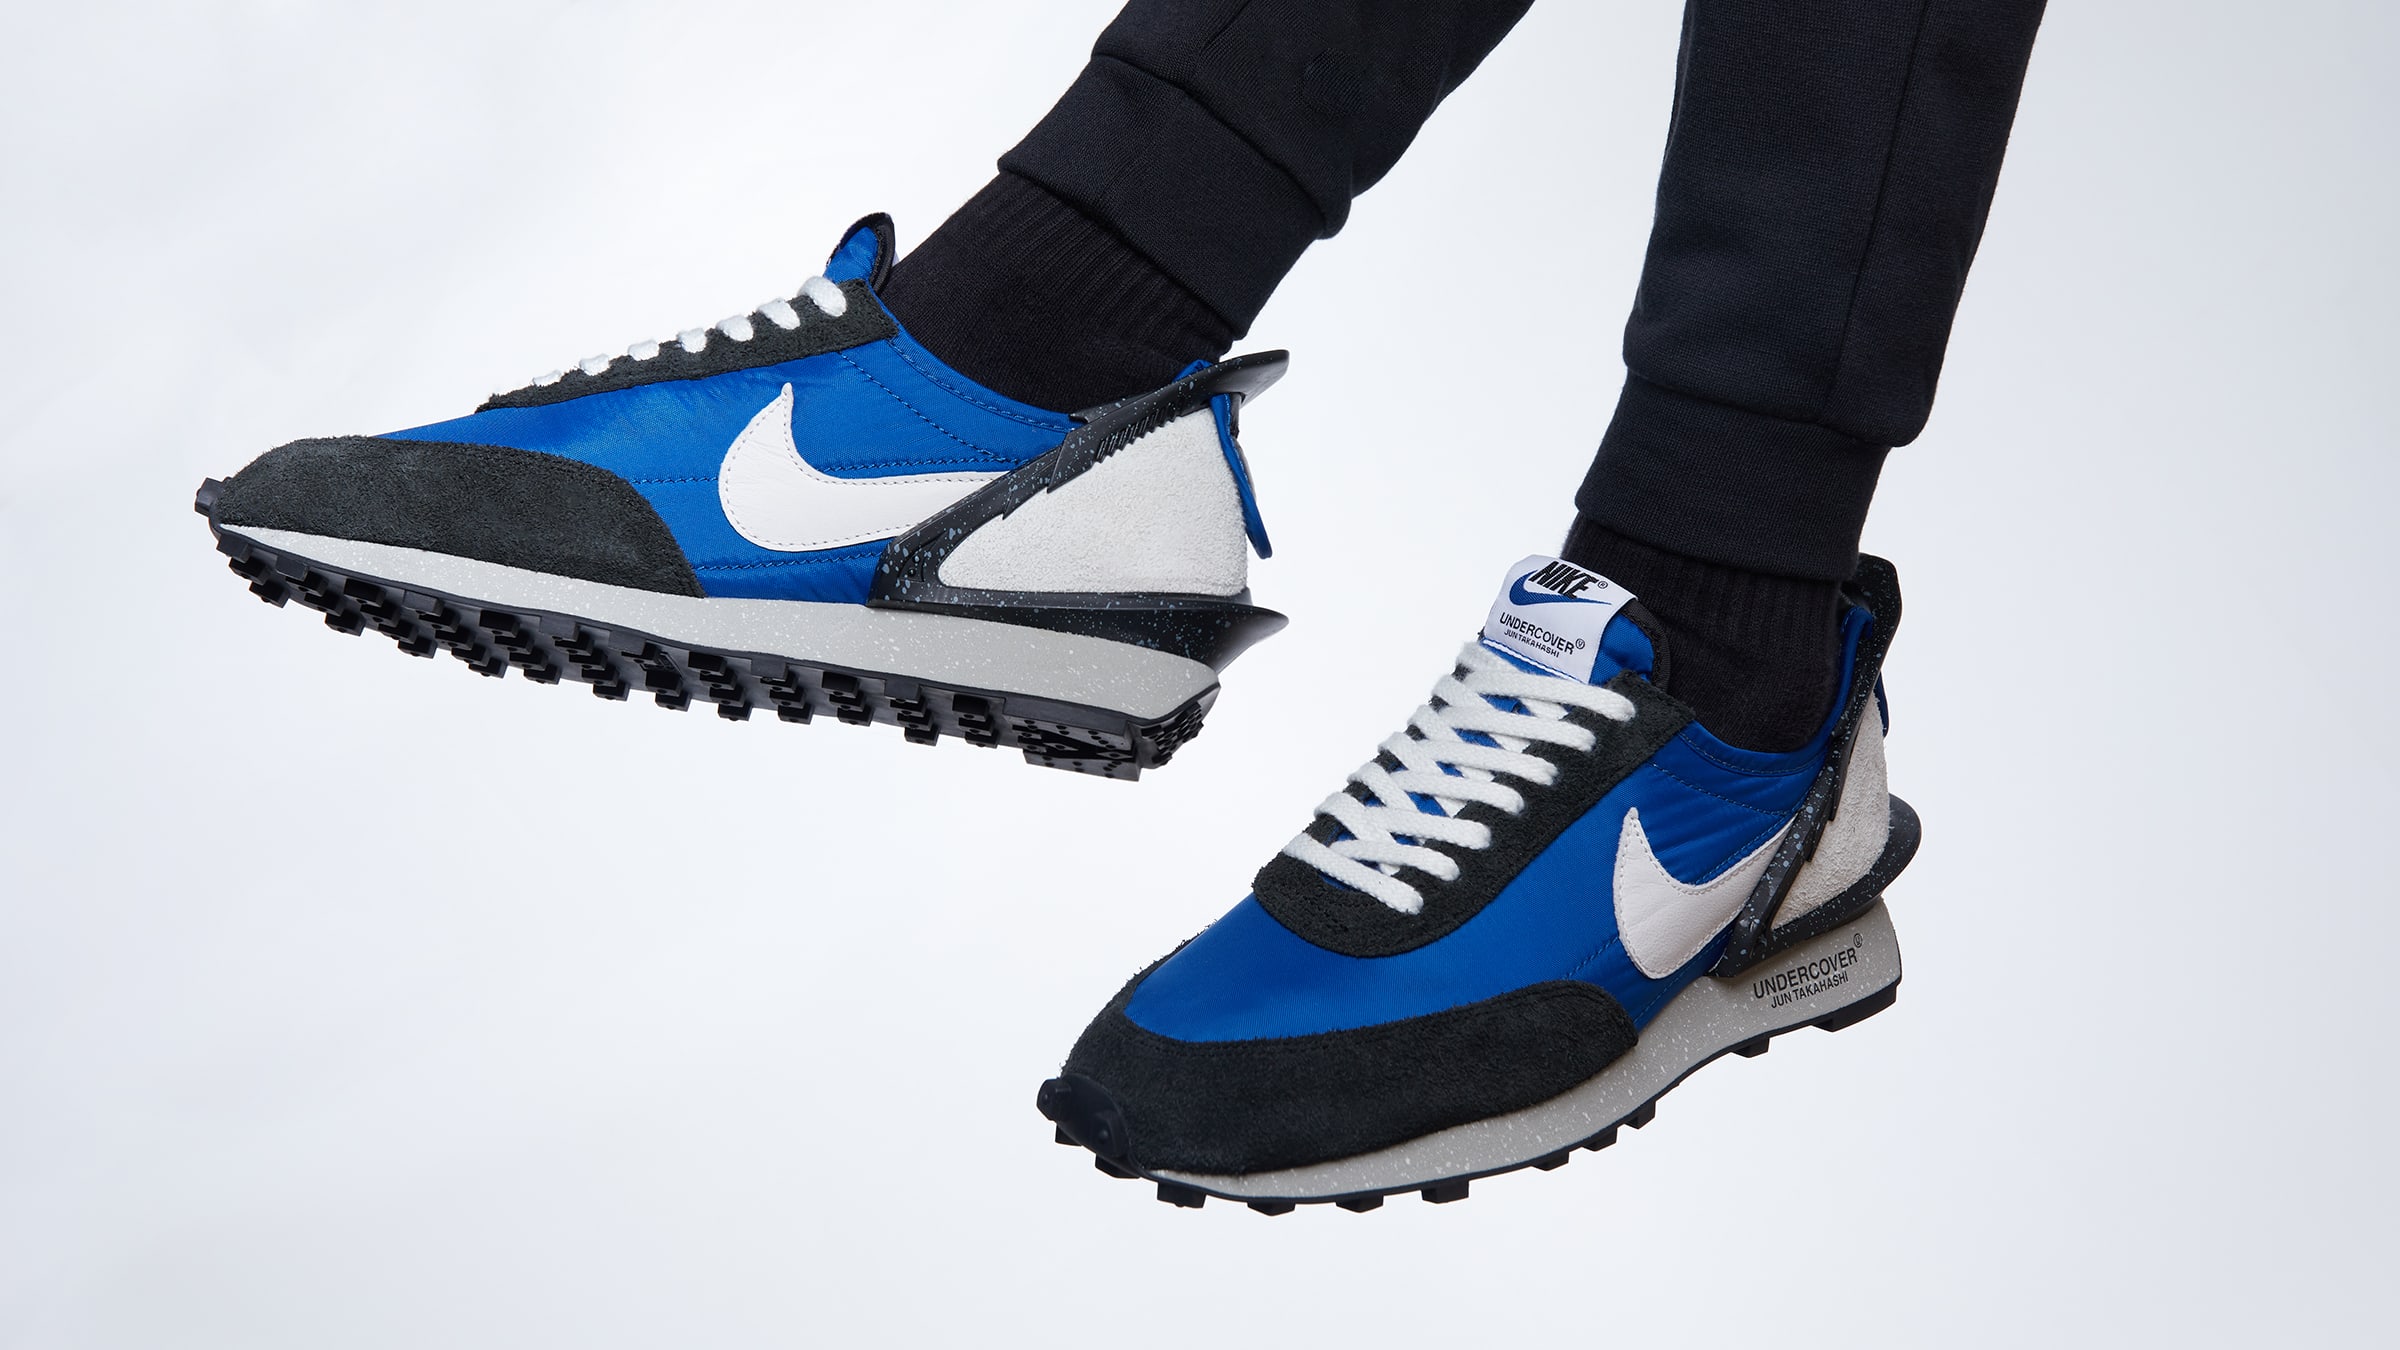 nike undercover blue